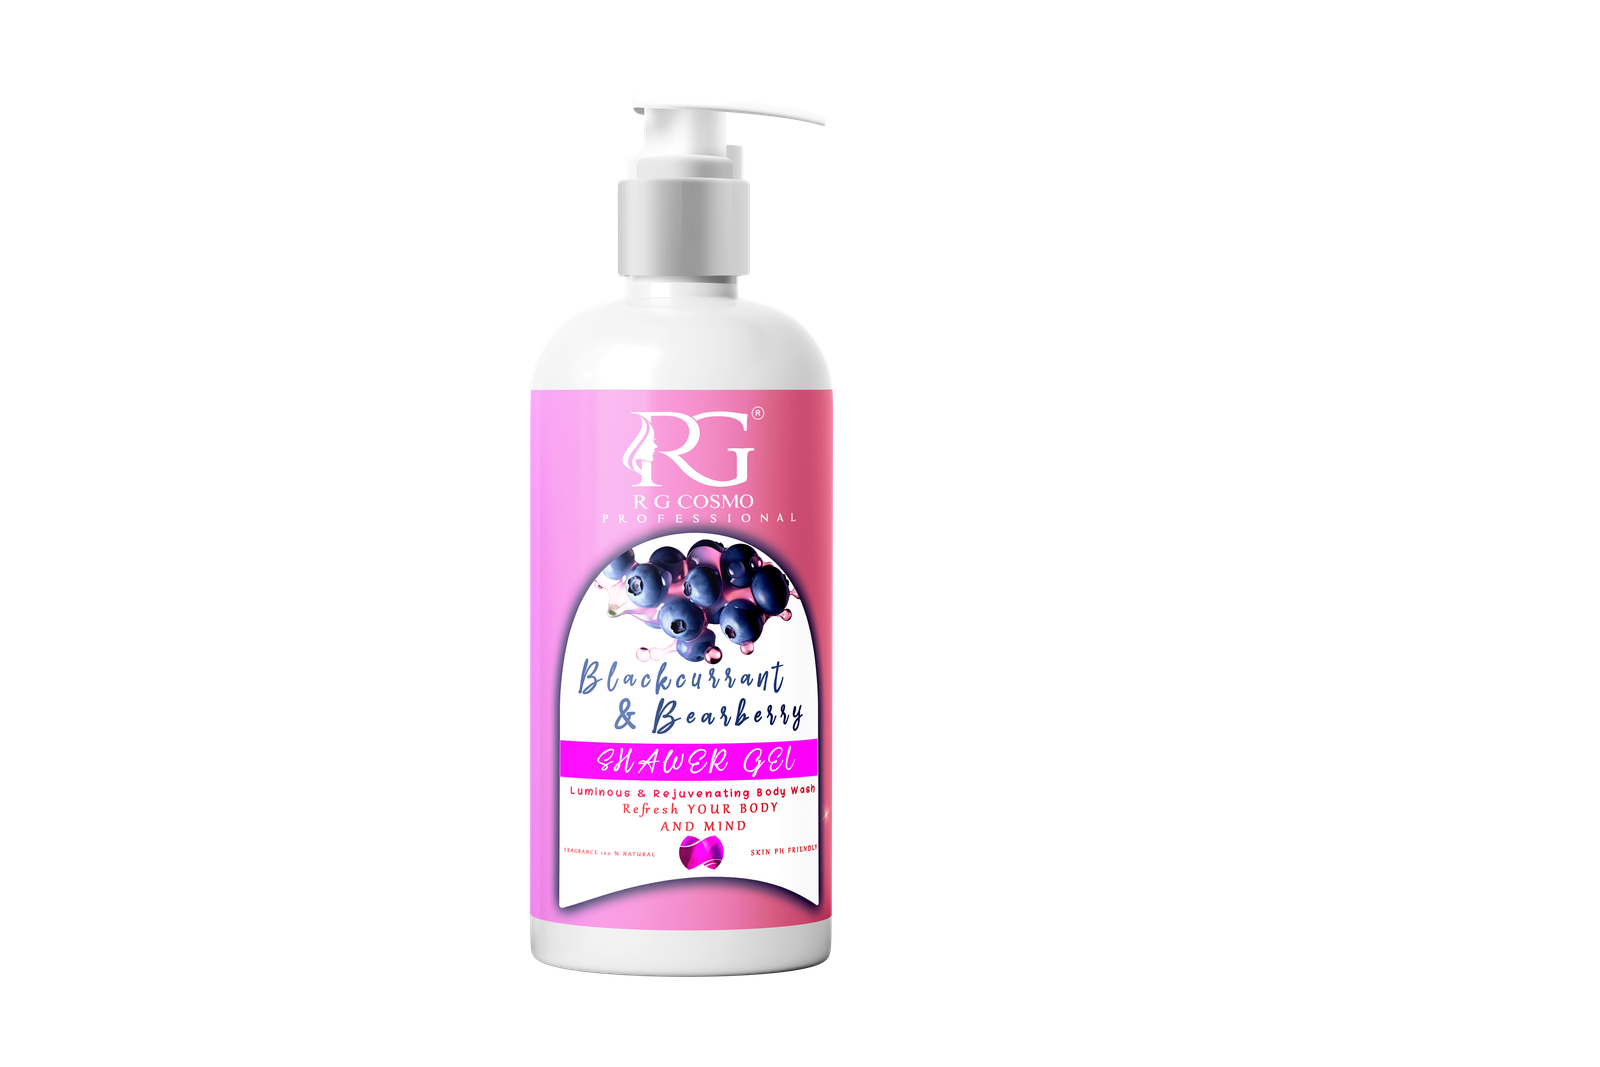 RG COSMO Blackcurrant & Bearberry Body Wash Shower Gel , 500 ML